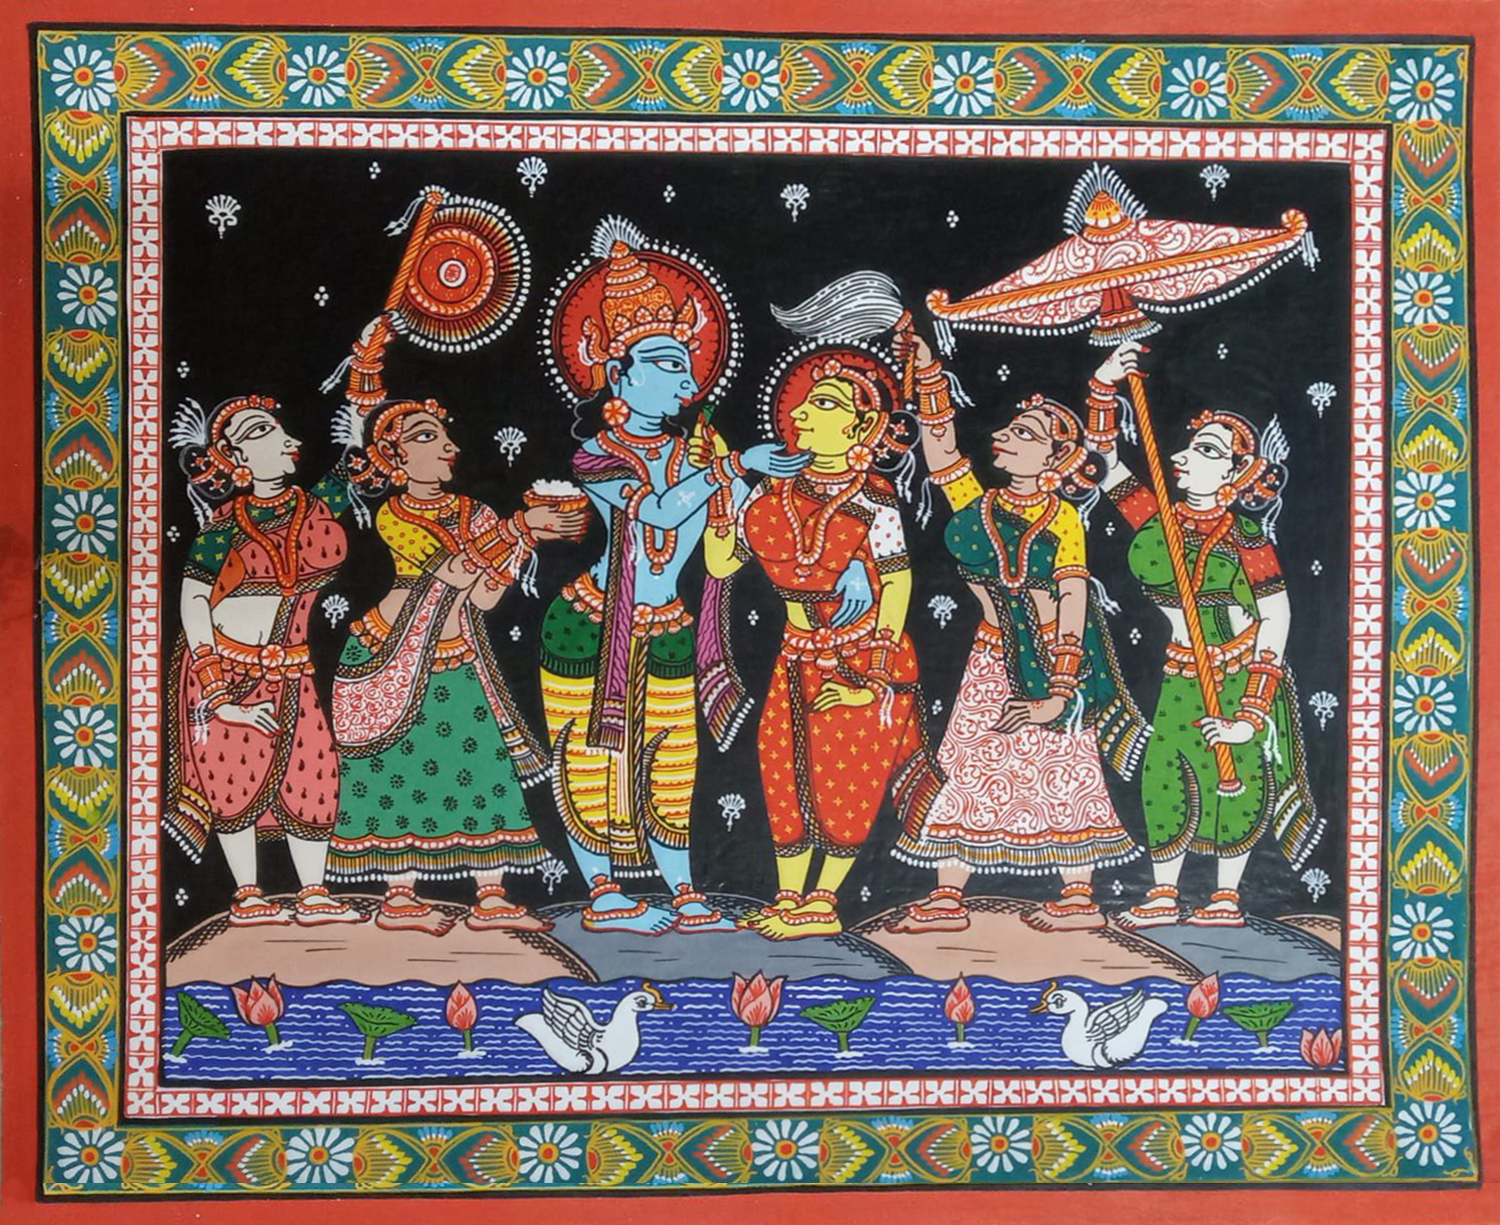 PATTACHITRA PAINTINGS, Cloth painting, style from orissa, traditional pattachitra artists